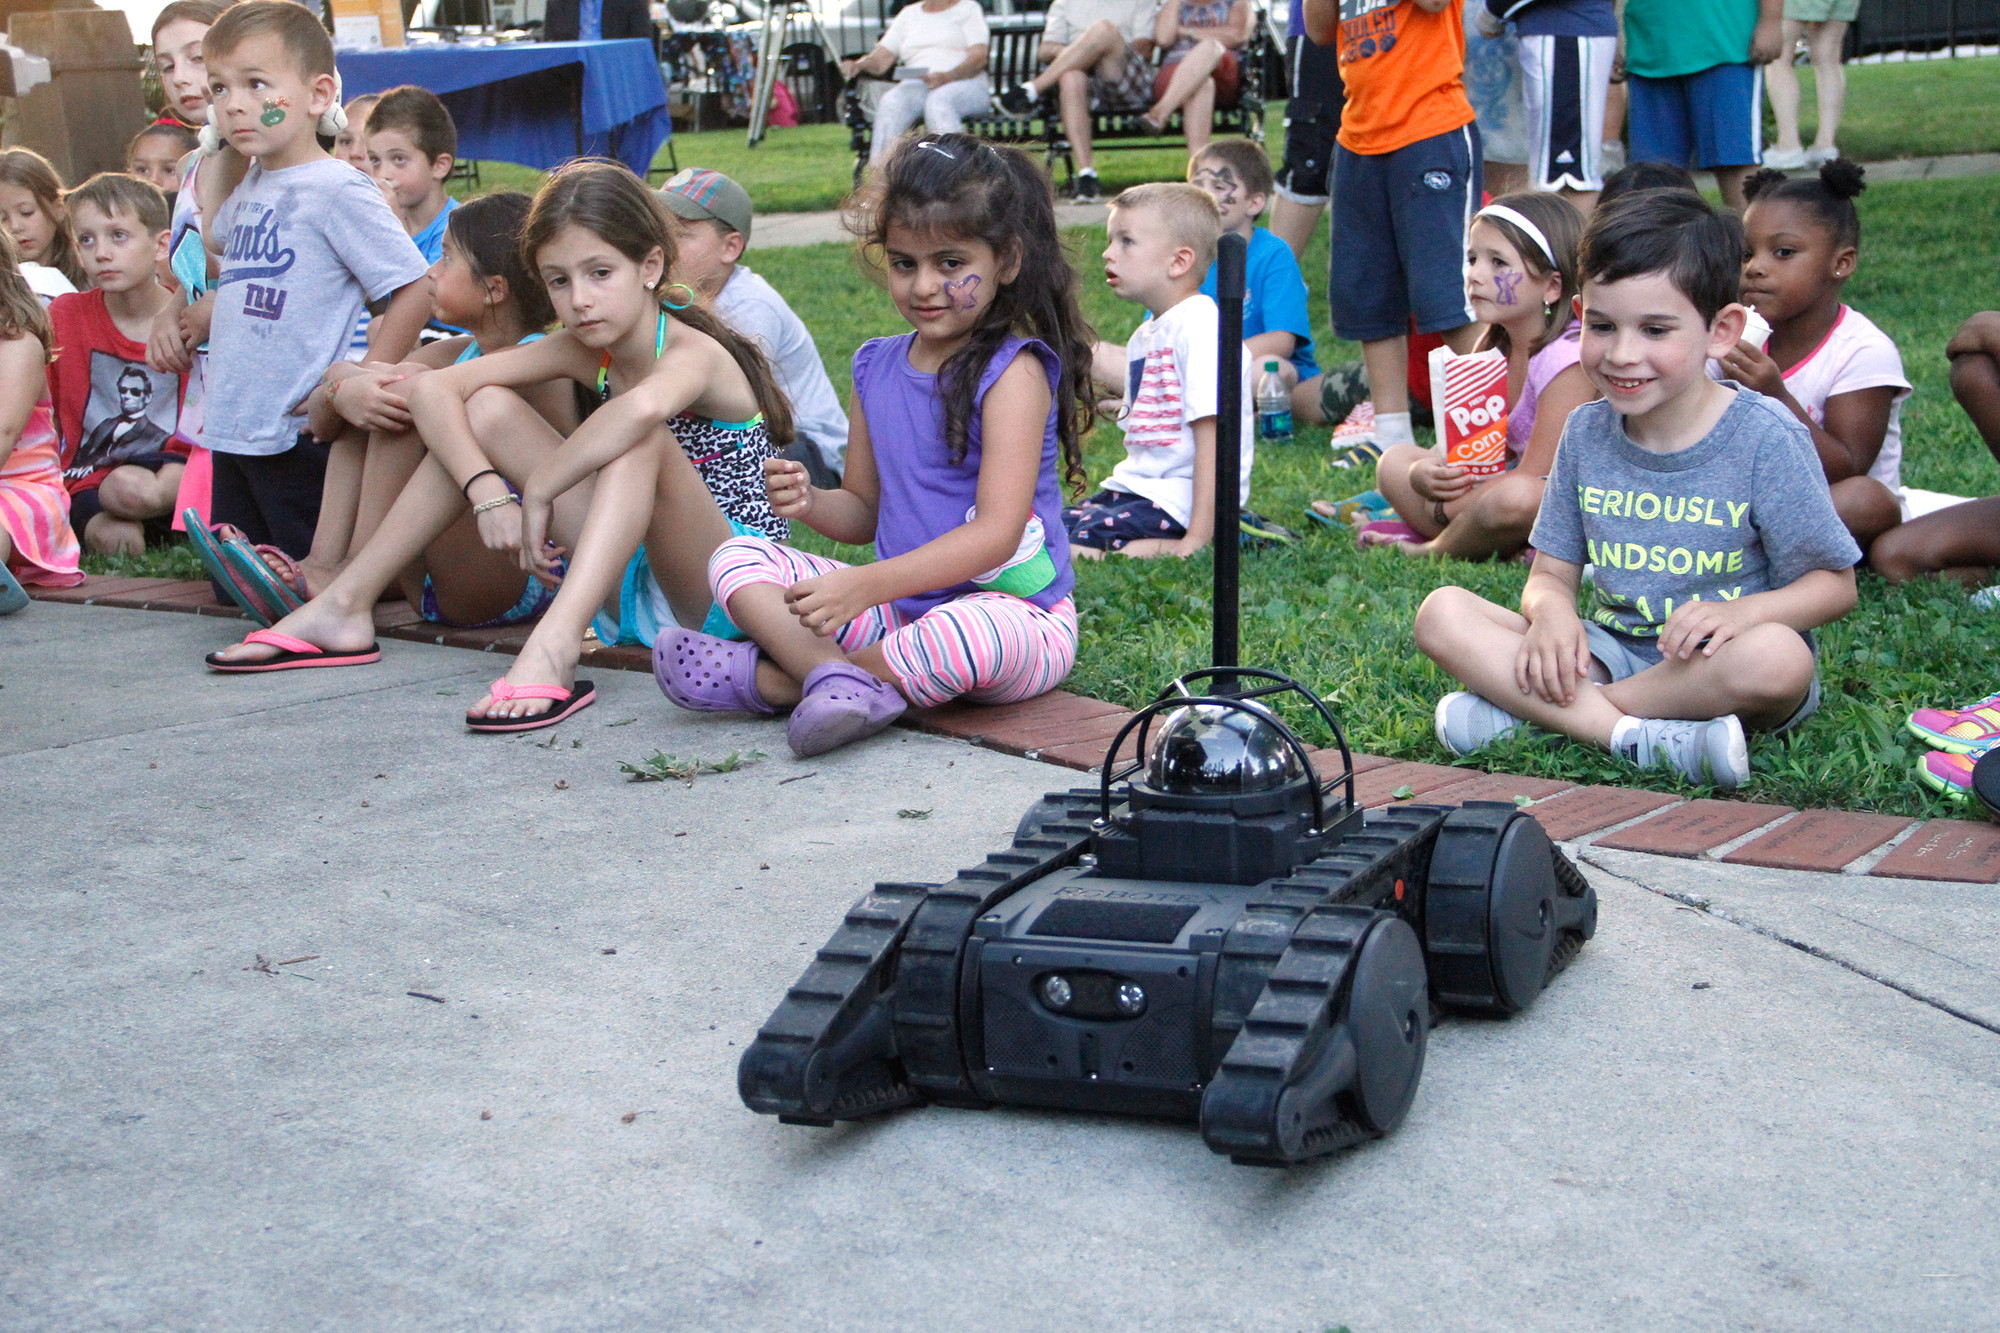 An appearance by Robotex, the NCPD’s arson robot, brought smiles upon kids’ faces at Veterans Memorial Park in East Meadow.